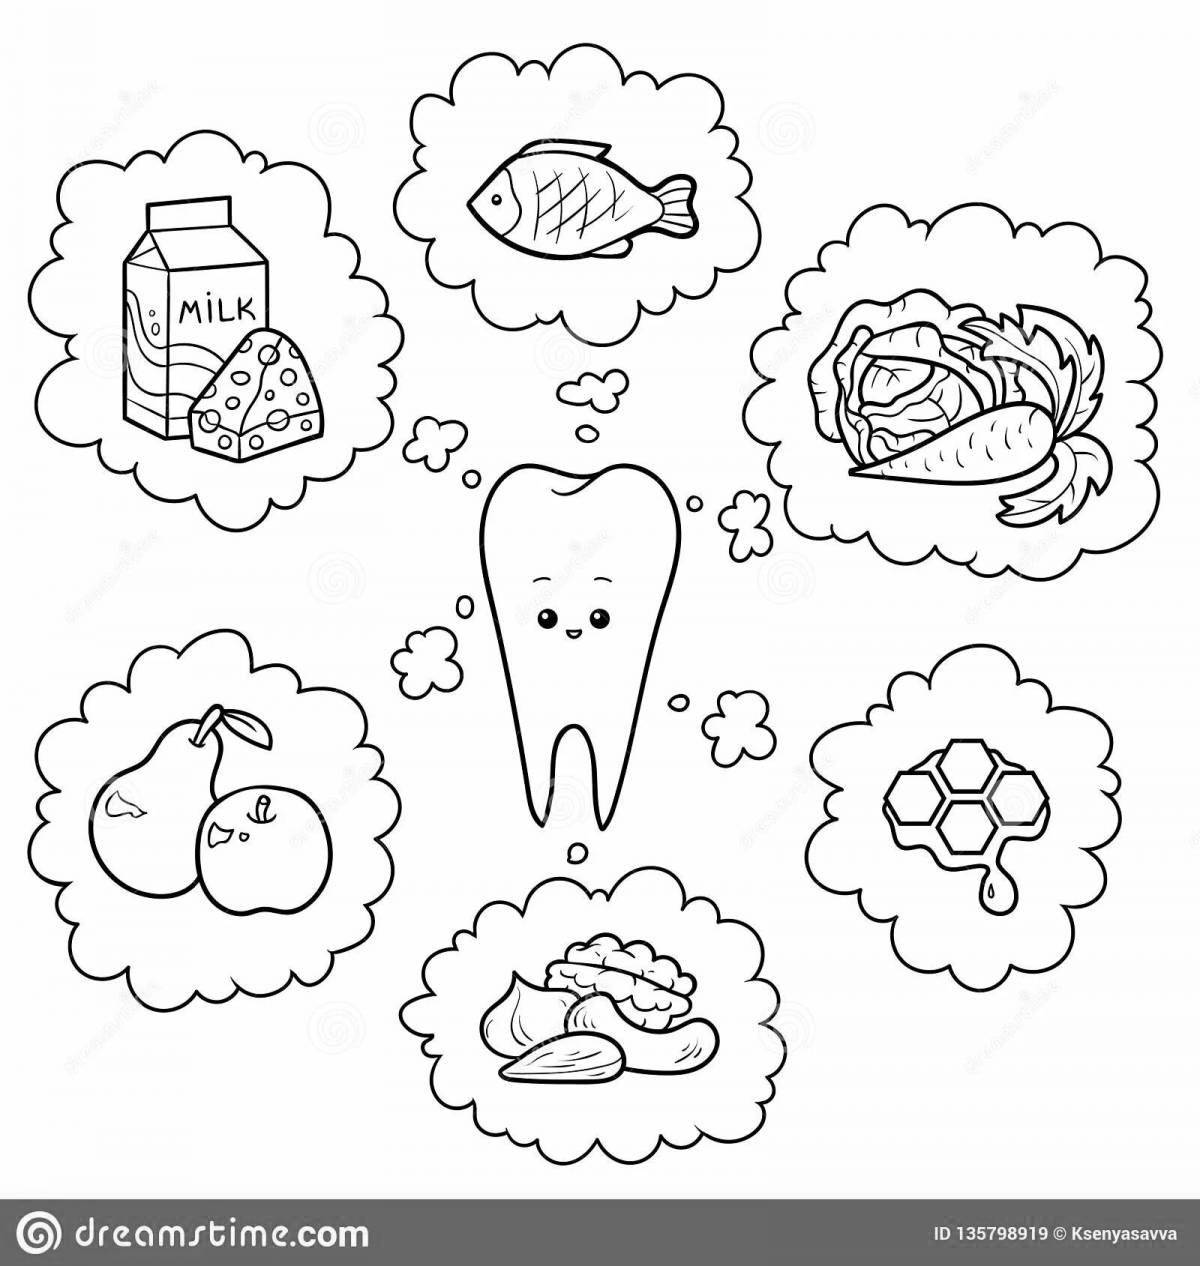 Nutrient-rich healthy food coloring page